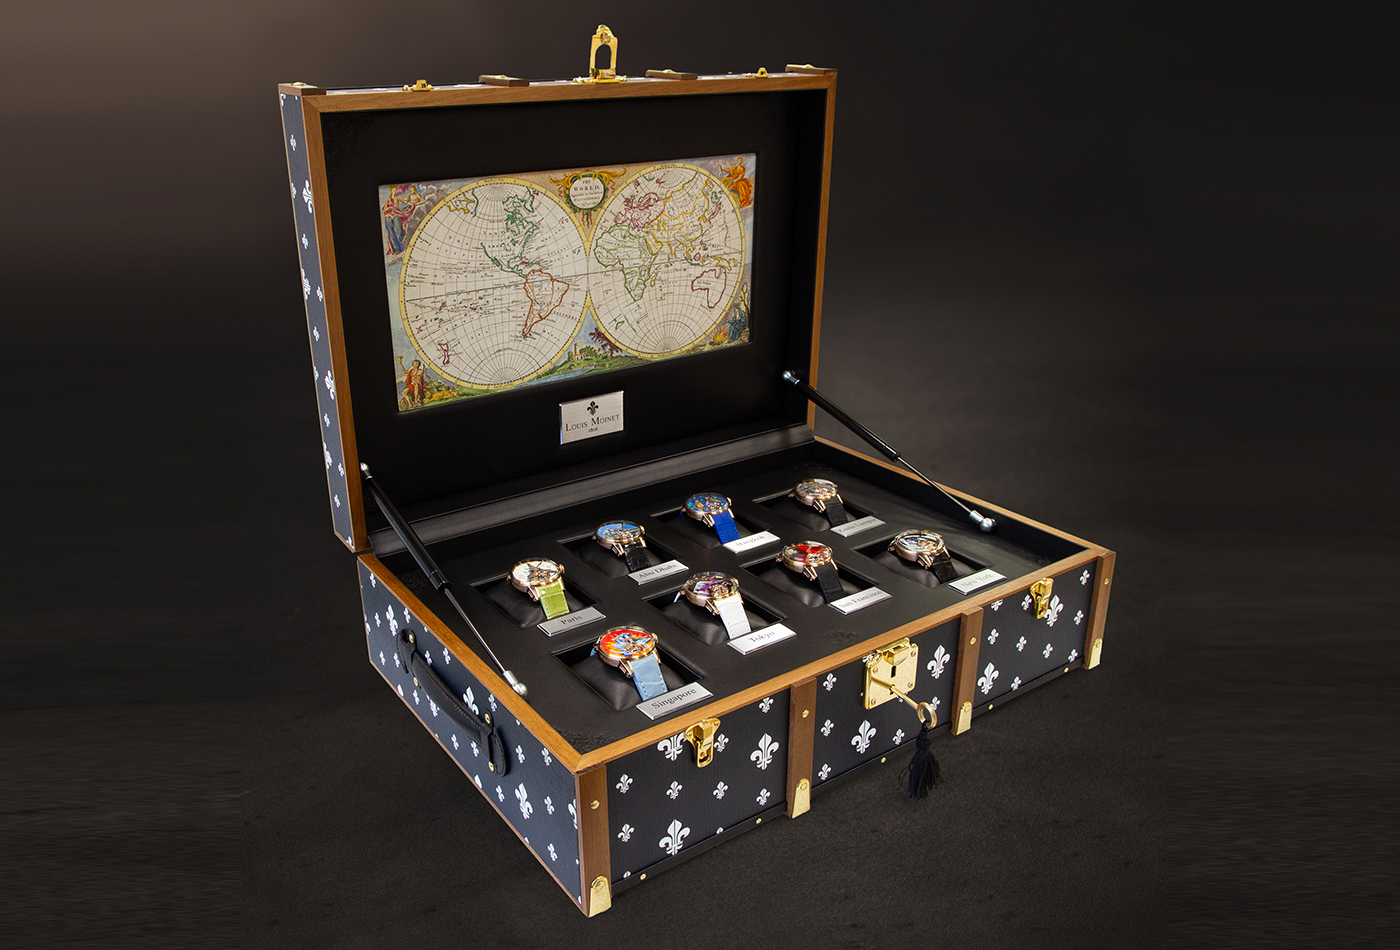 Trunk displaysing the 8 Louis Moinet Around the World in 8 Days timepieces